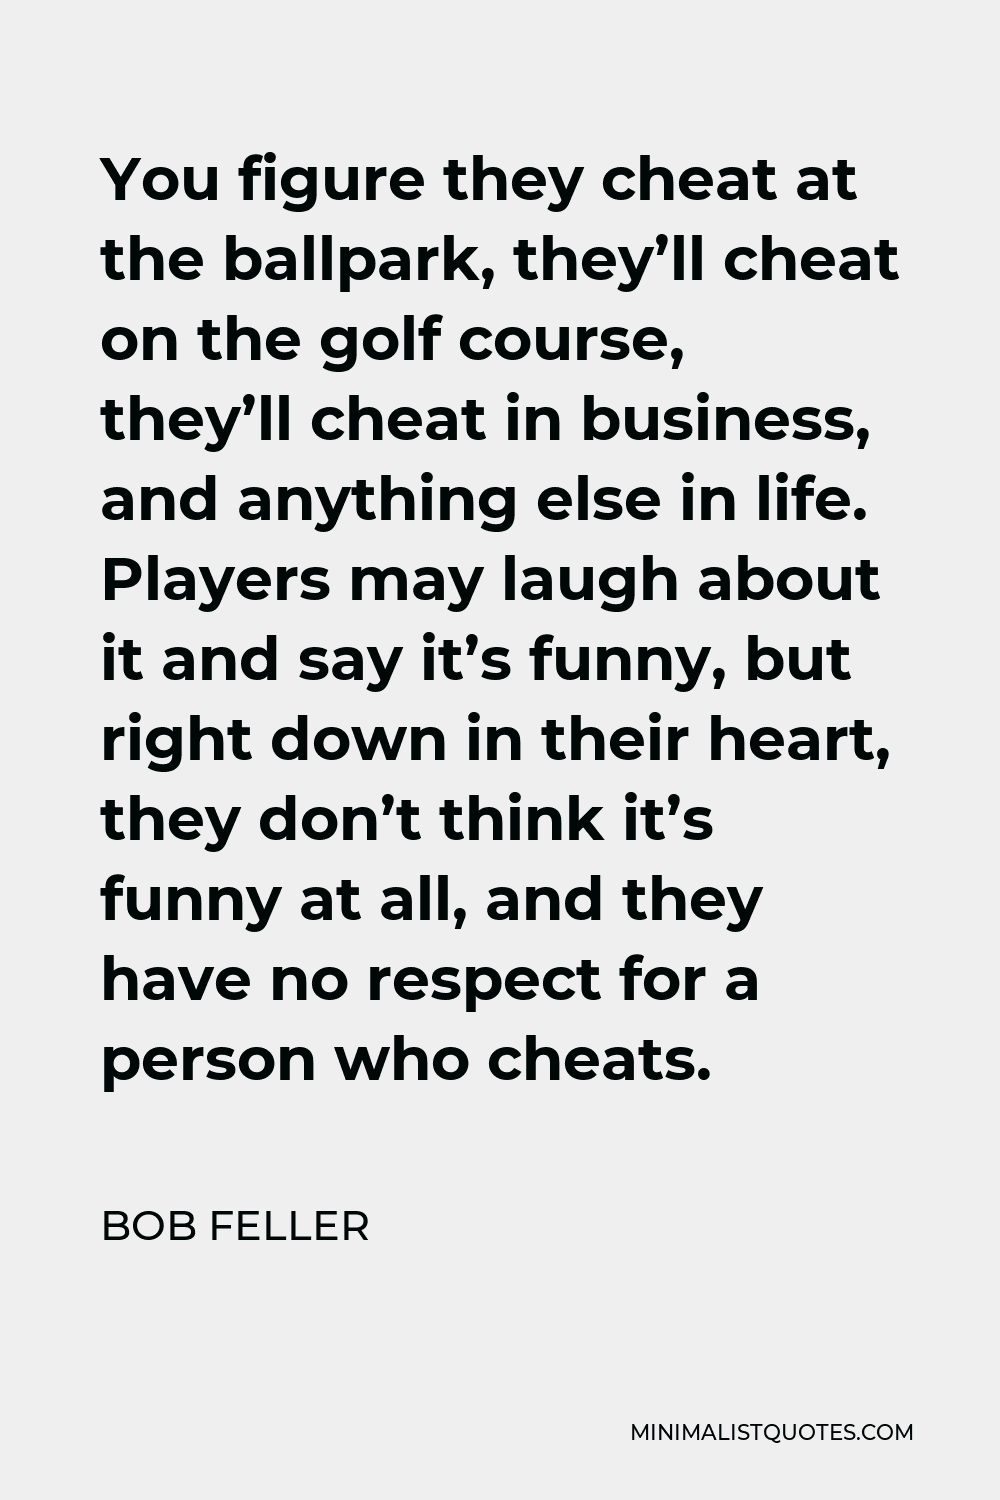 Bob Feller Quote - You figure they cheat at the ballpark, they’ll cheat on the golf course, they’ll cheat in business, and anything else in life. Players may laugh about it and say it’s funny, but right down in their heart, they don’t think it’s funny at all, and they have no respect for a person who cheats.